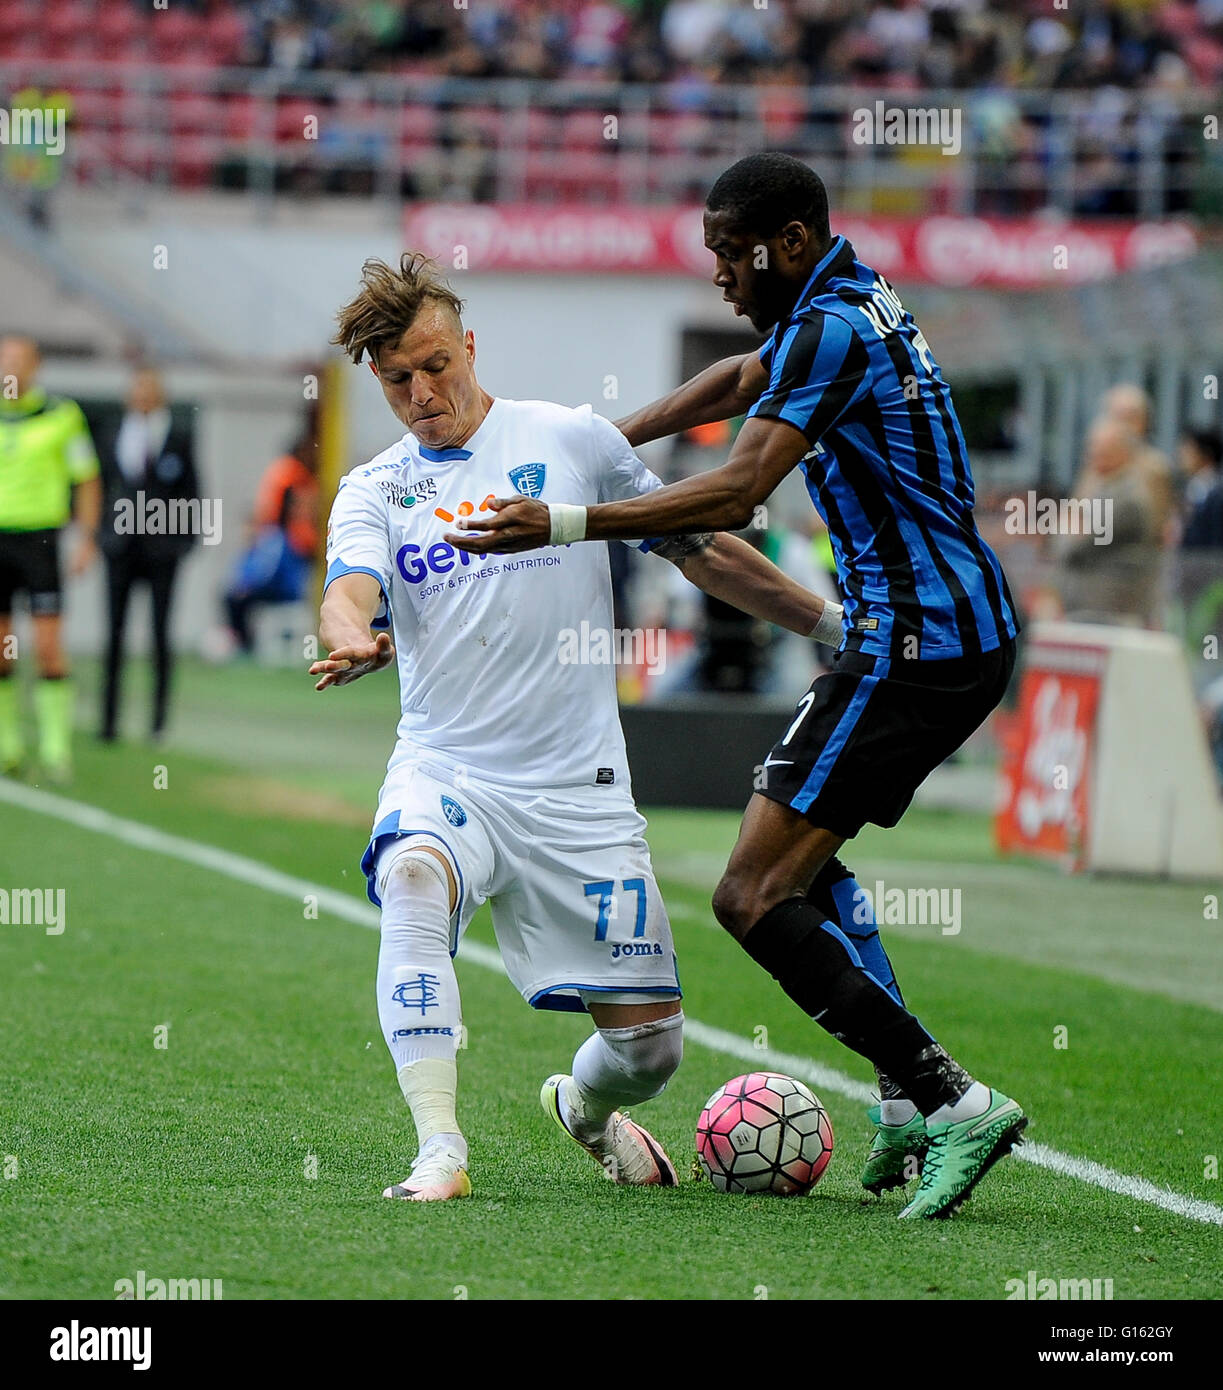 Milan, Italy. 07th May, 2016. Marcel Buchel and Geoffrey Kondogbia compete for the ball during the Serie A football match between FC Internazionale and Empoli FC. FC Internazionale wins 2-1 over Empoli FC. © Nicolò Campo/Pacific Press/Alamy Live News Stock Photo